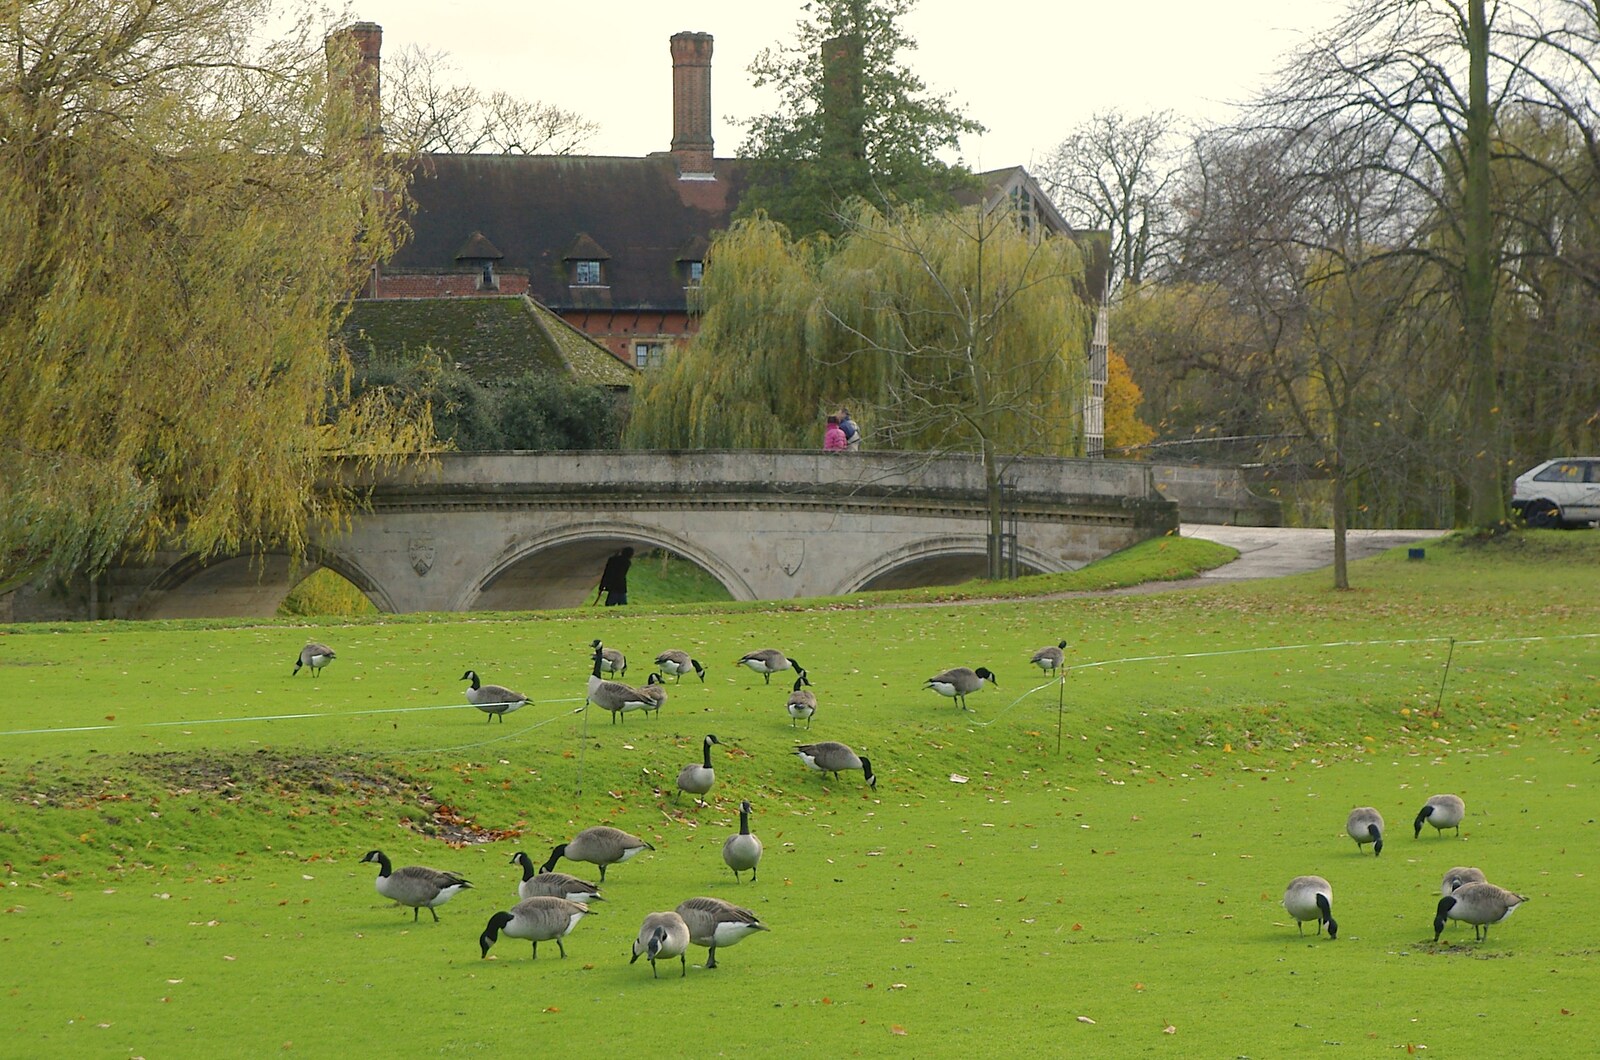 Geese mill around and peck at the grass from Autumn Colleges: a Wander around The Backs, Cambridge - 26th November